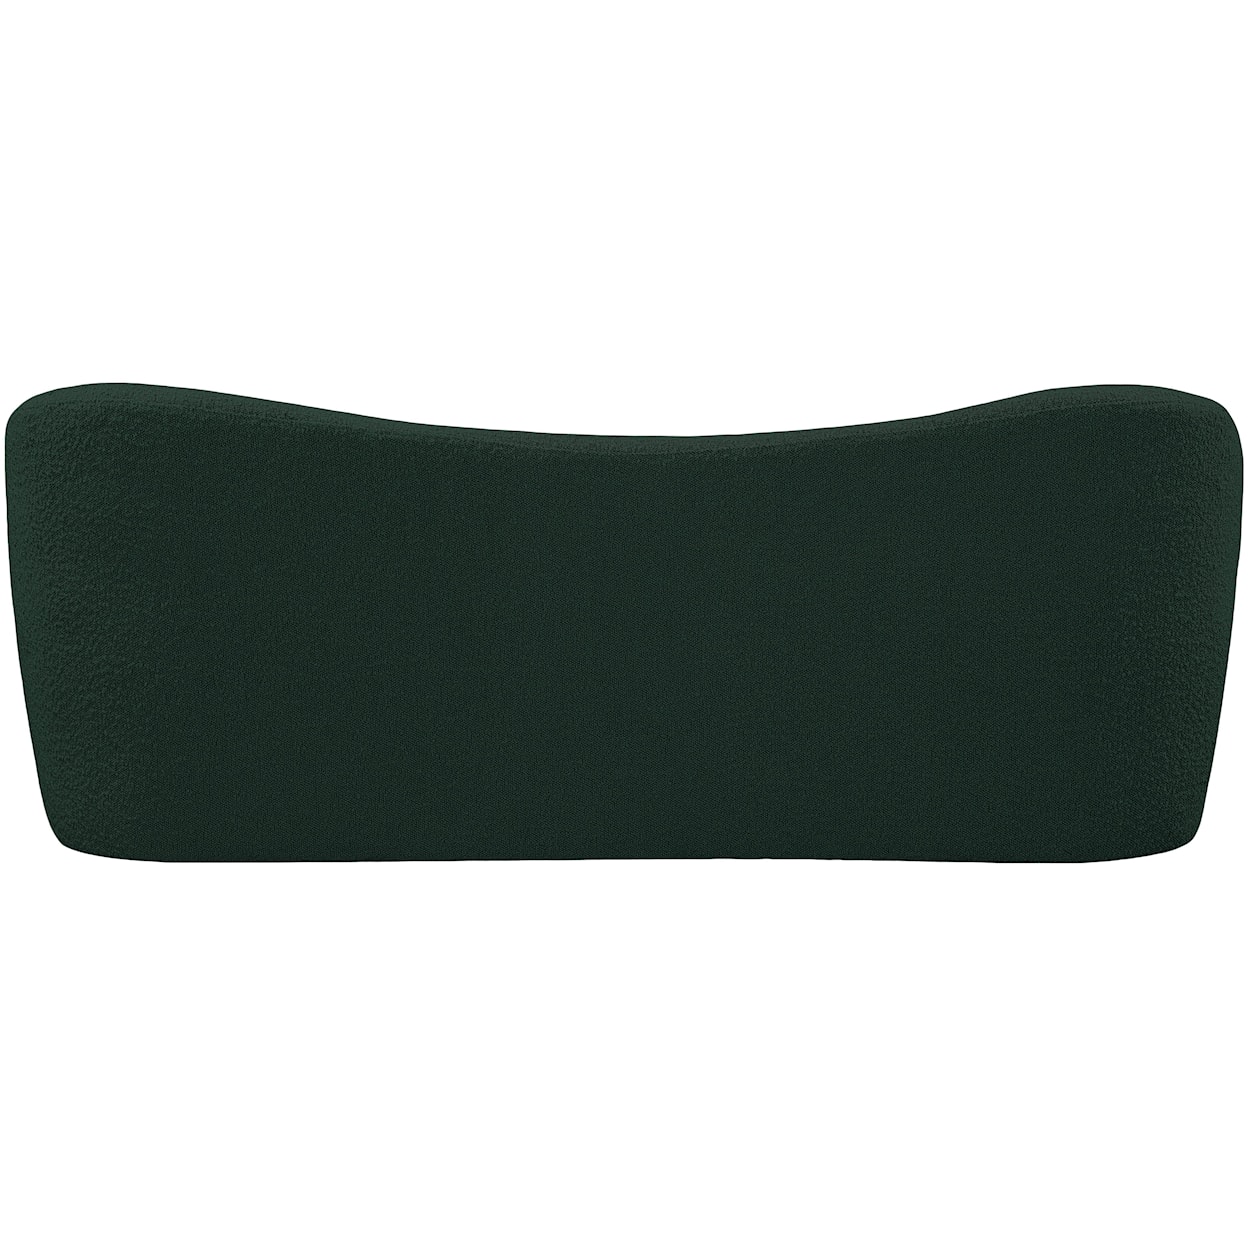 Meridian Furniture Flair Upholstered Green Boucle Fabric Bench